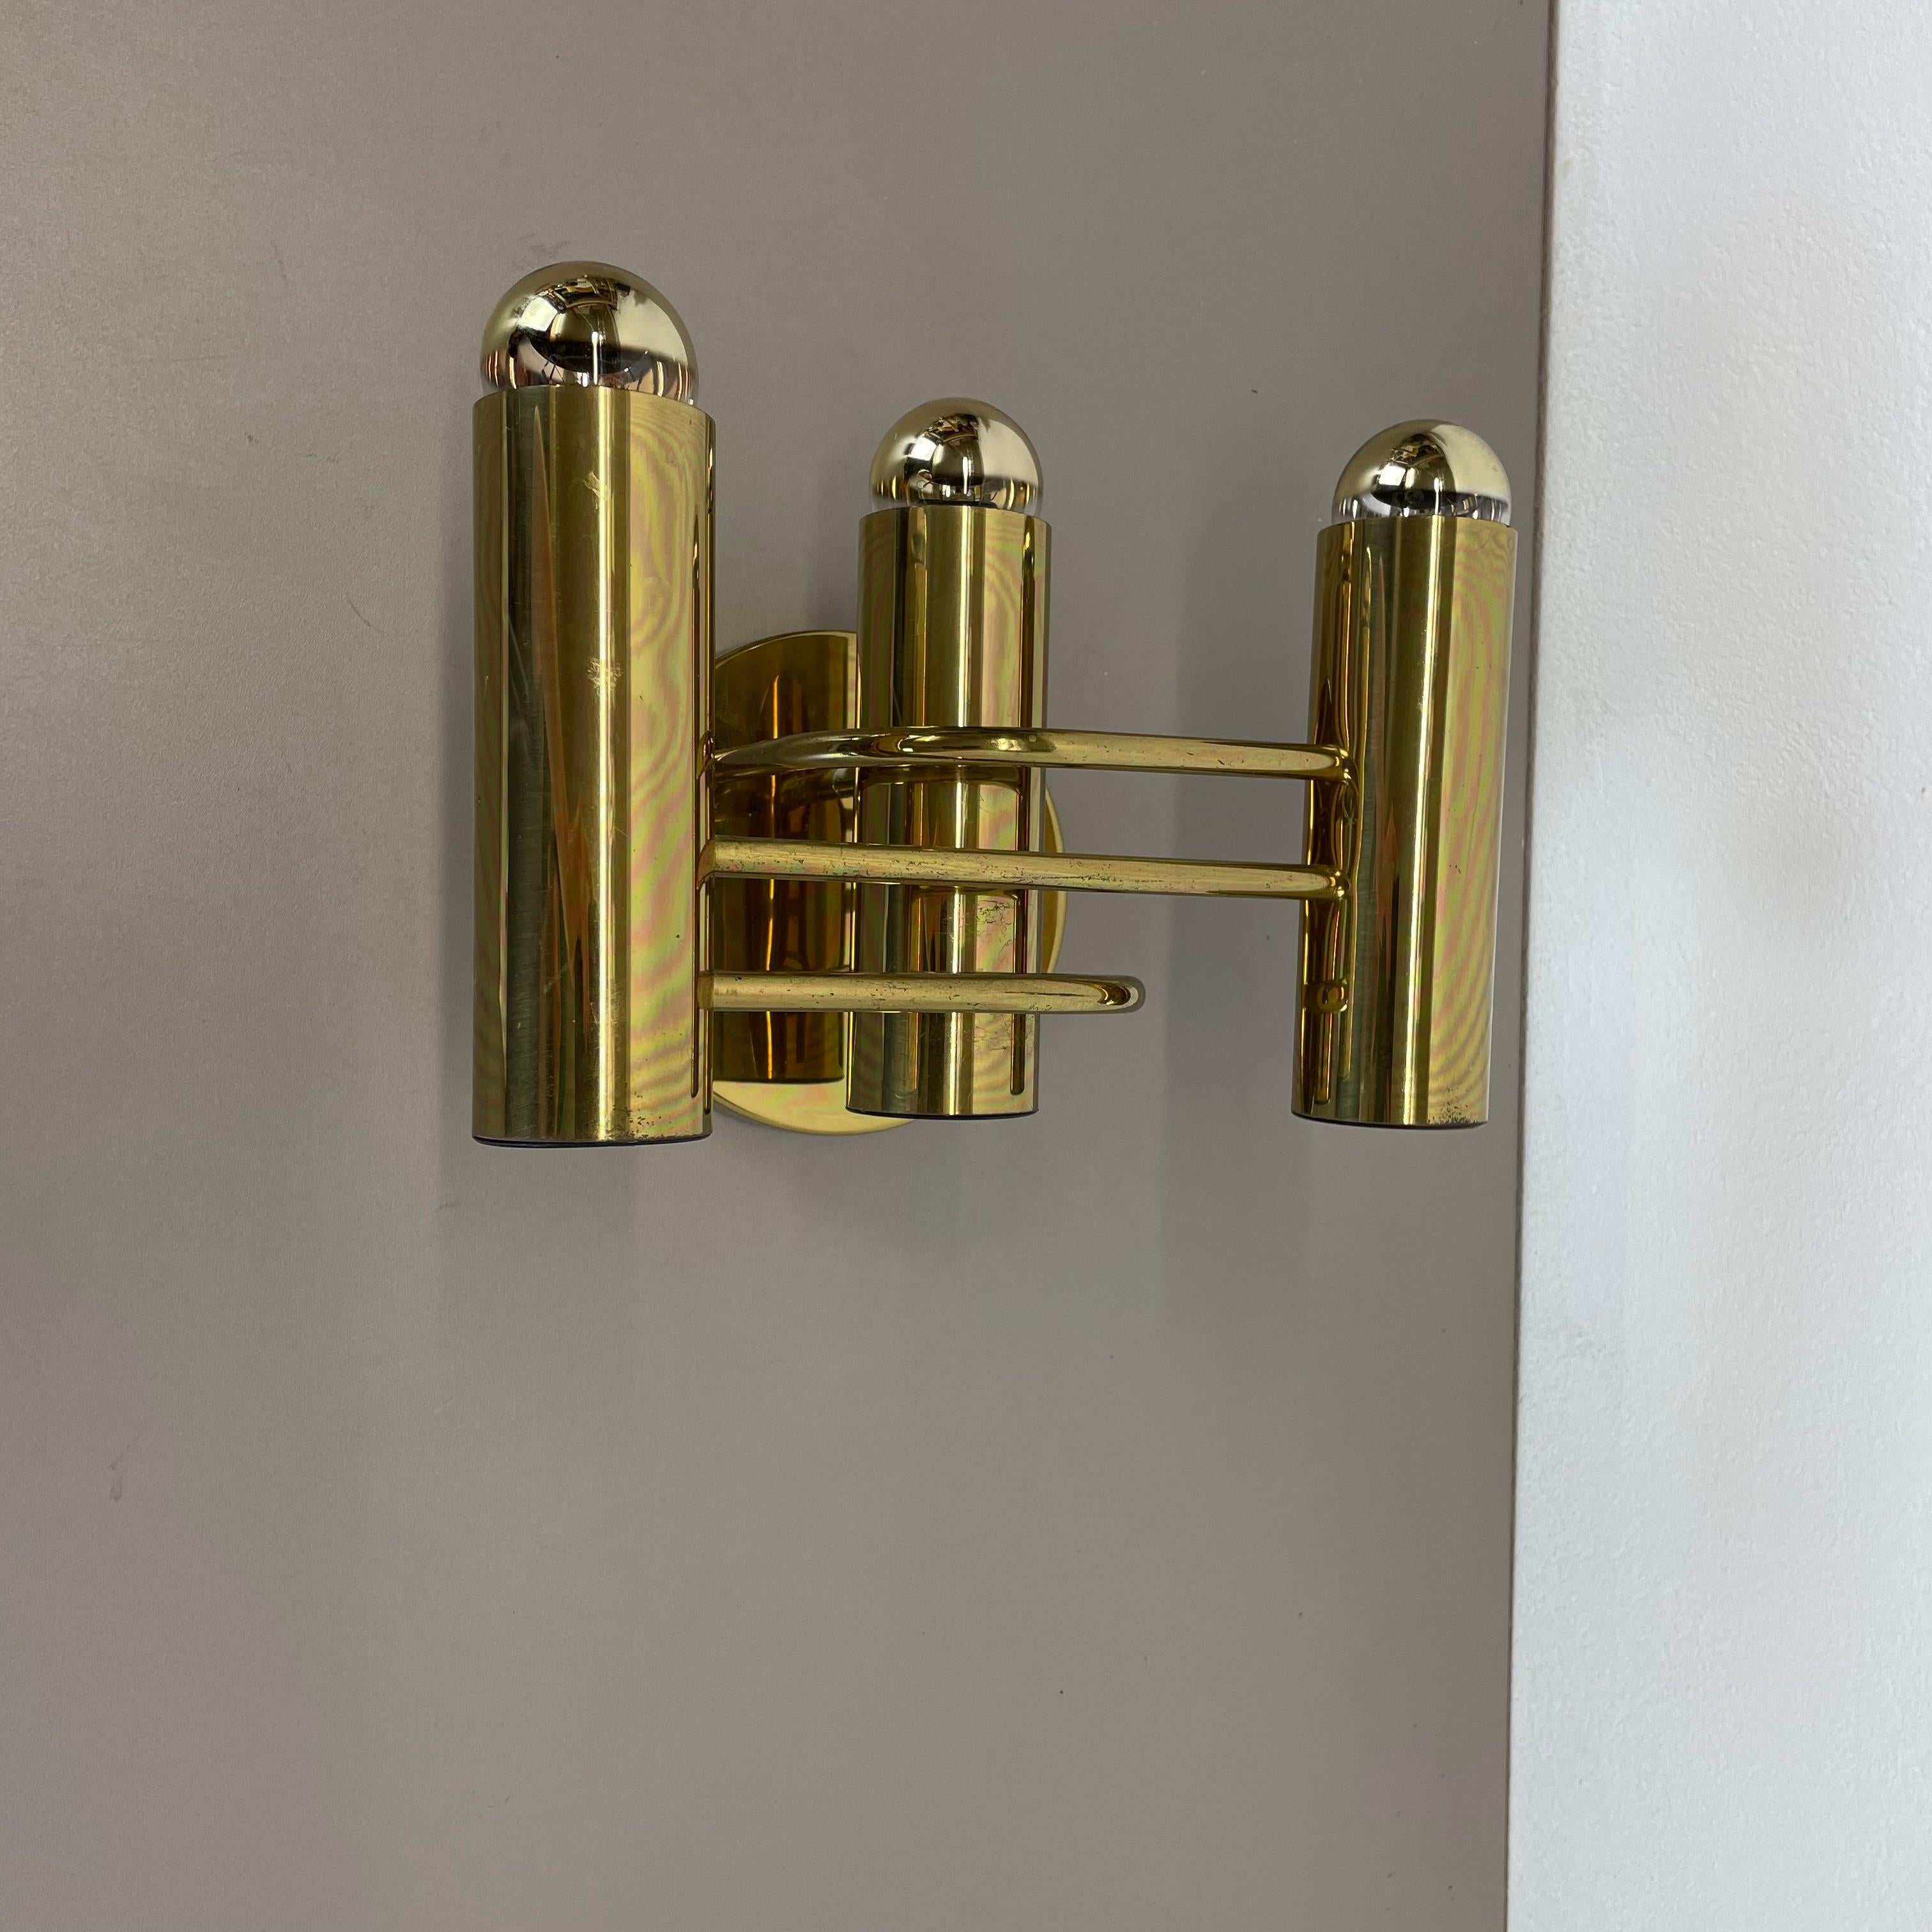 Beautiful 3-Light Sciolari Wall Light Sconces By LEOLA Leuchten Germany 1970s In Good Condition For Sale In Kirchlengern, DE